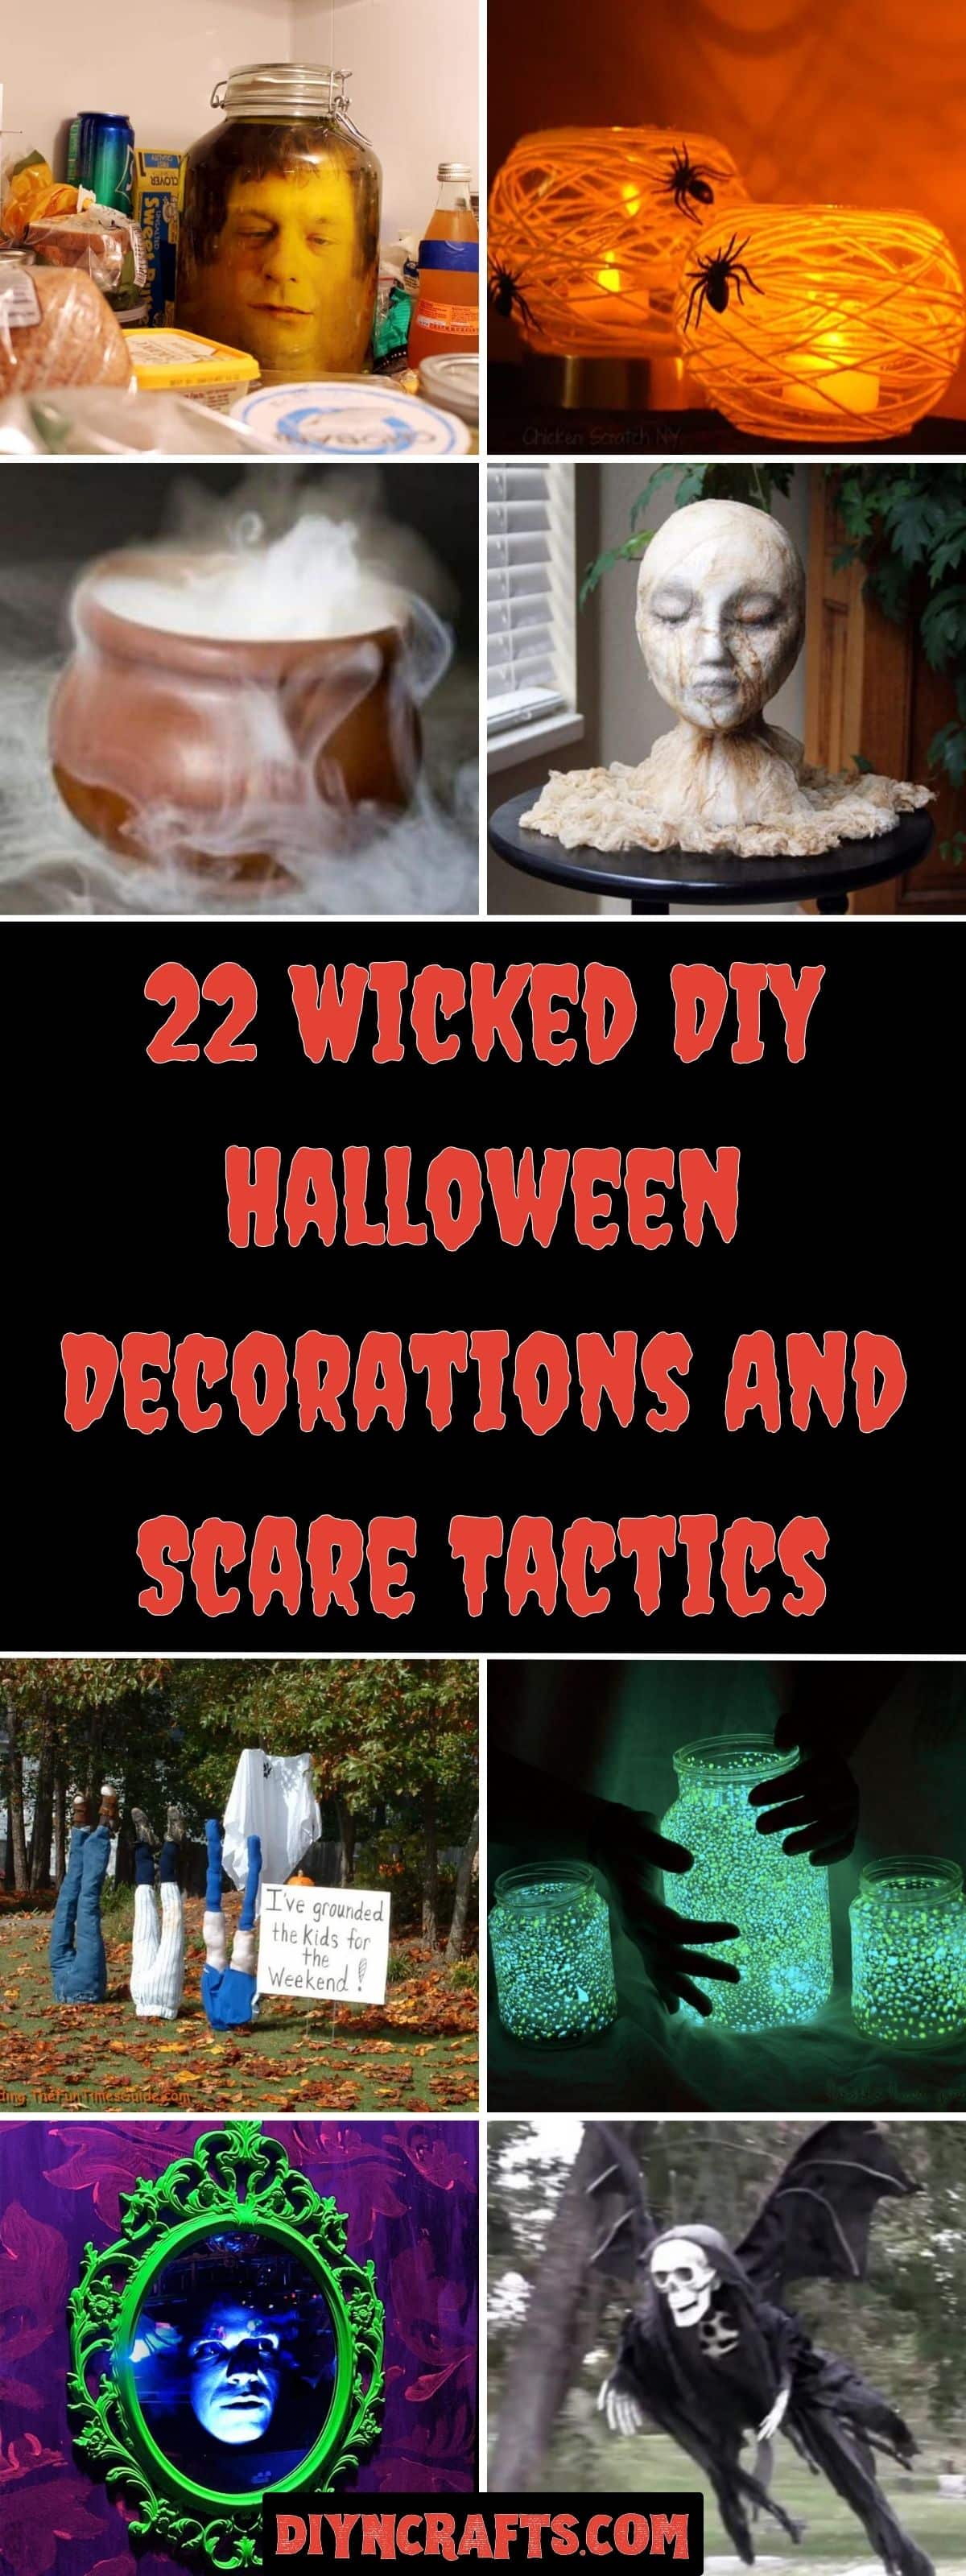 22 Wicked DIY Halloween Decorations And Scare Tactics collage.